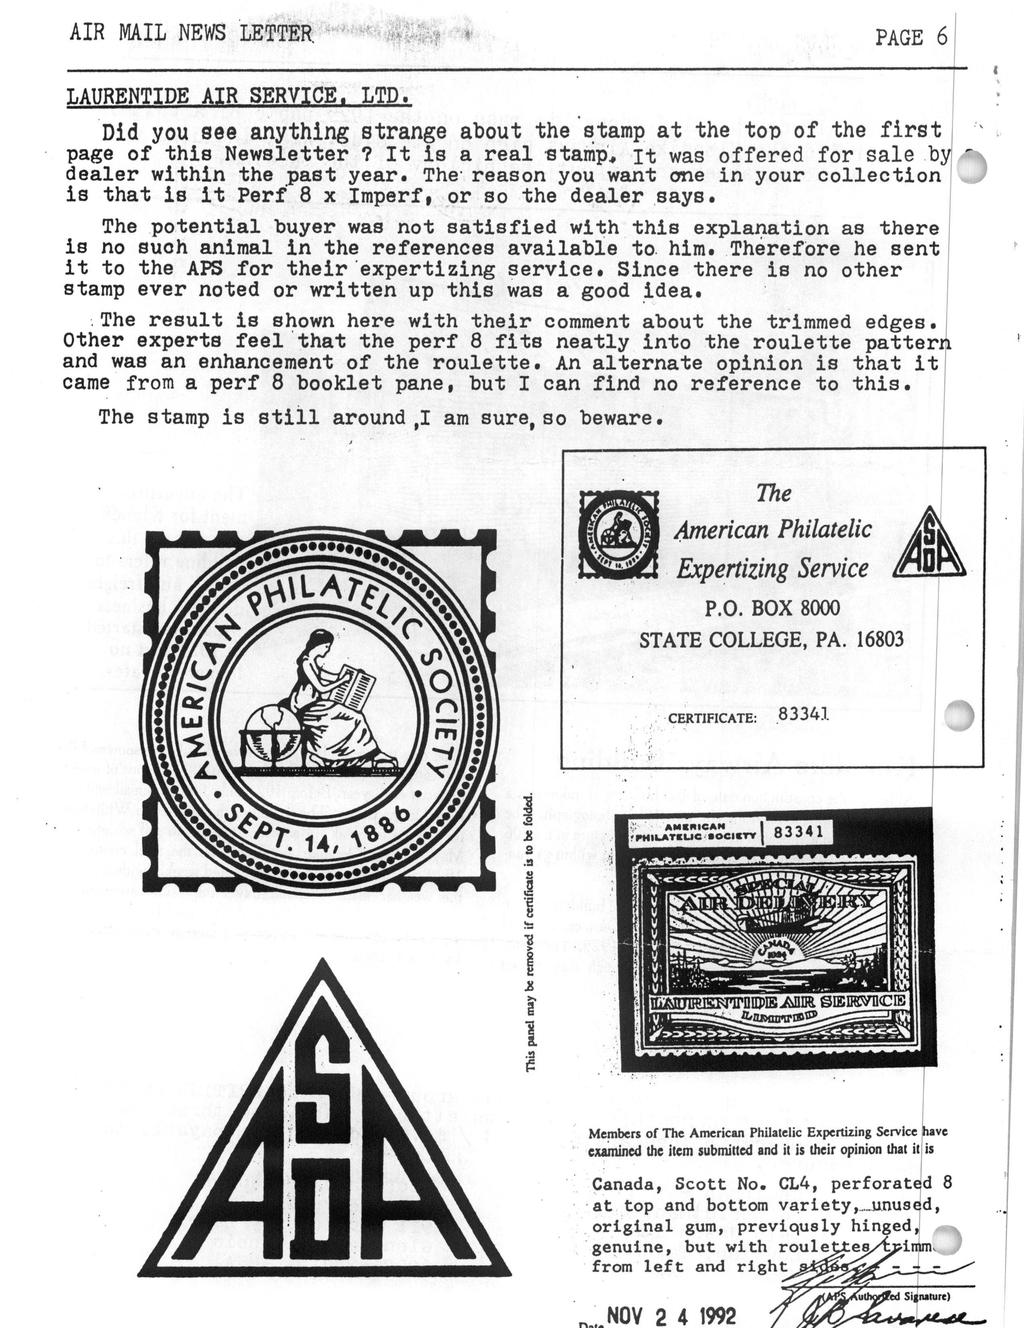 _,_ NOV 2 4 1992 AIR MAIL NEWS LETTER. PAGE 6 LAURENTIDE AIR SERVICE. LTD. Did you see anything strange about the'stamp at the top of the first page of this Newsletter?